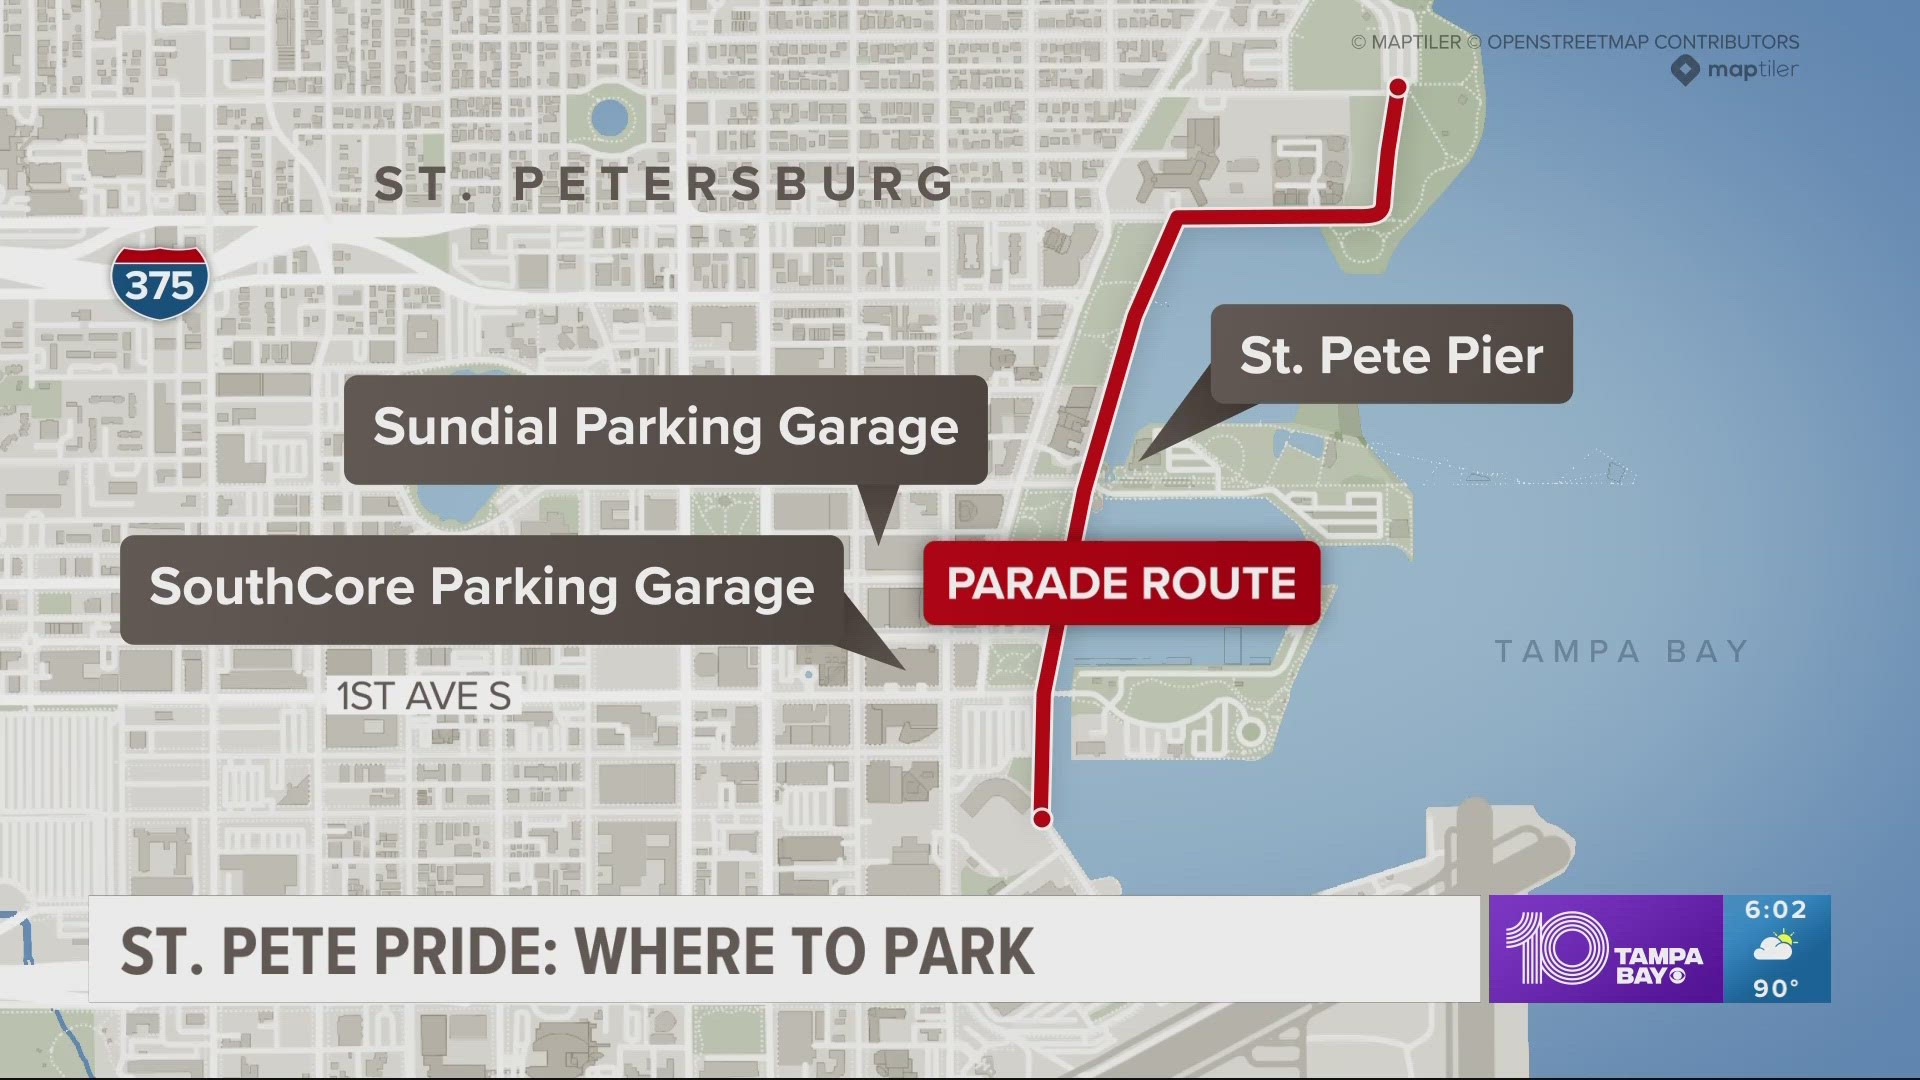 St. Pete's Pride celebration begins on June 2 with a kick-off party on Central Avenue.